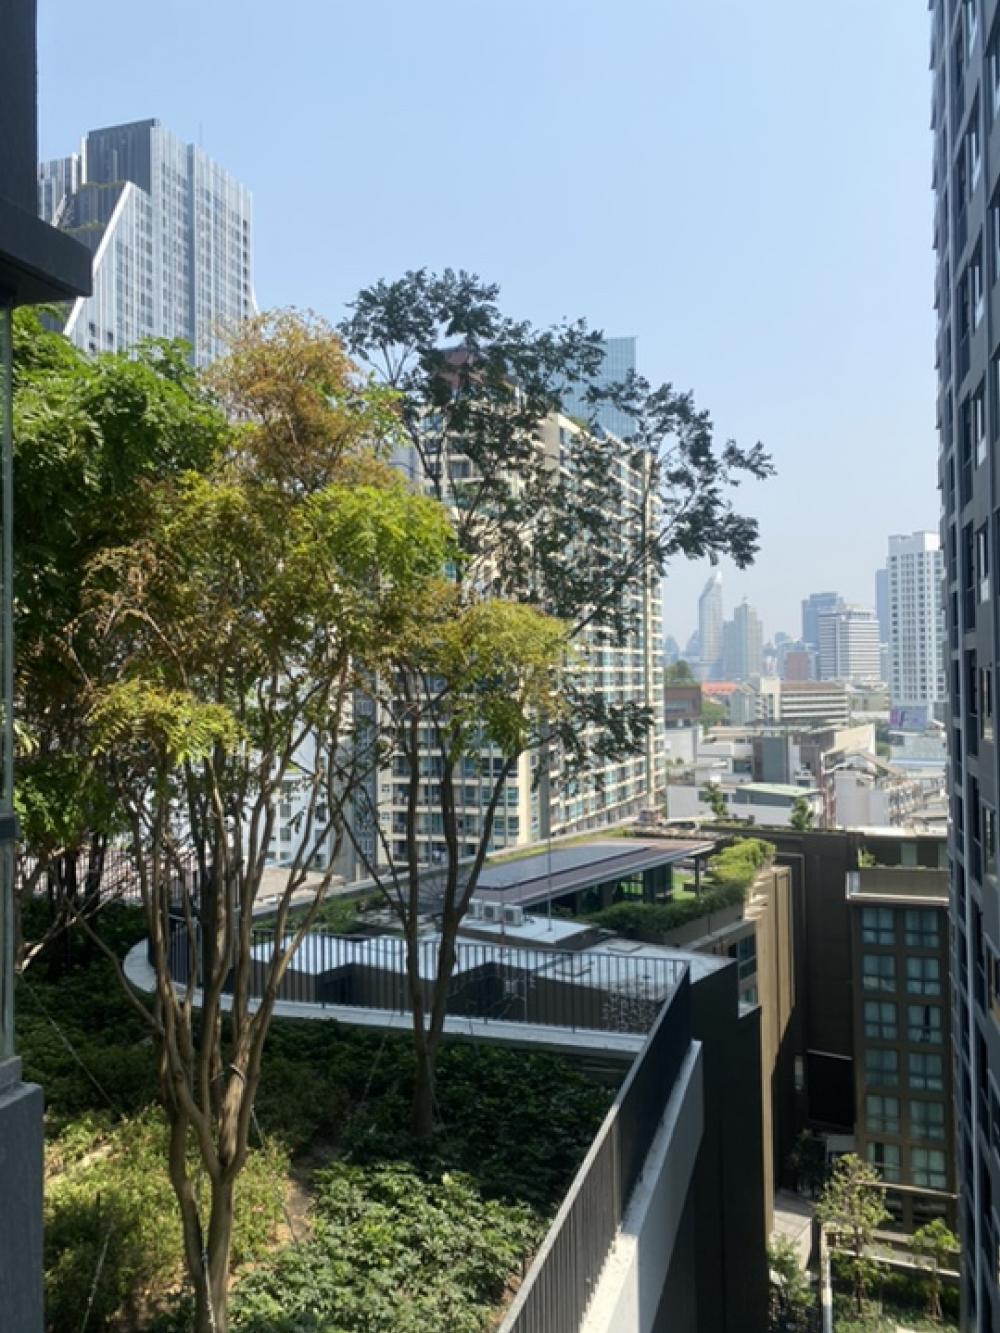 Sale DownCondoSiam Paragon ,Chulalongkorn,Samyan : Sale by owner, Ideo Chula Samyan, studio 28 sq m, garden view, building A, the same building as the car park, no need to walk. Not hot, view of the garden, cool and comfortable all day